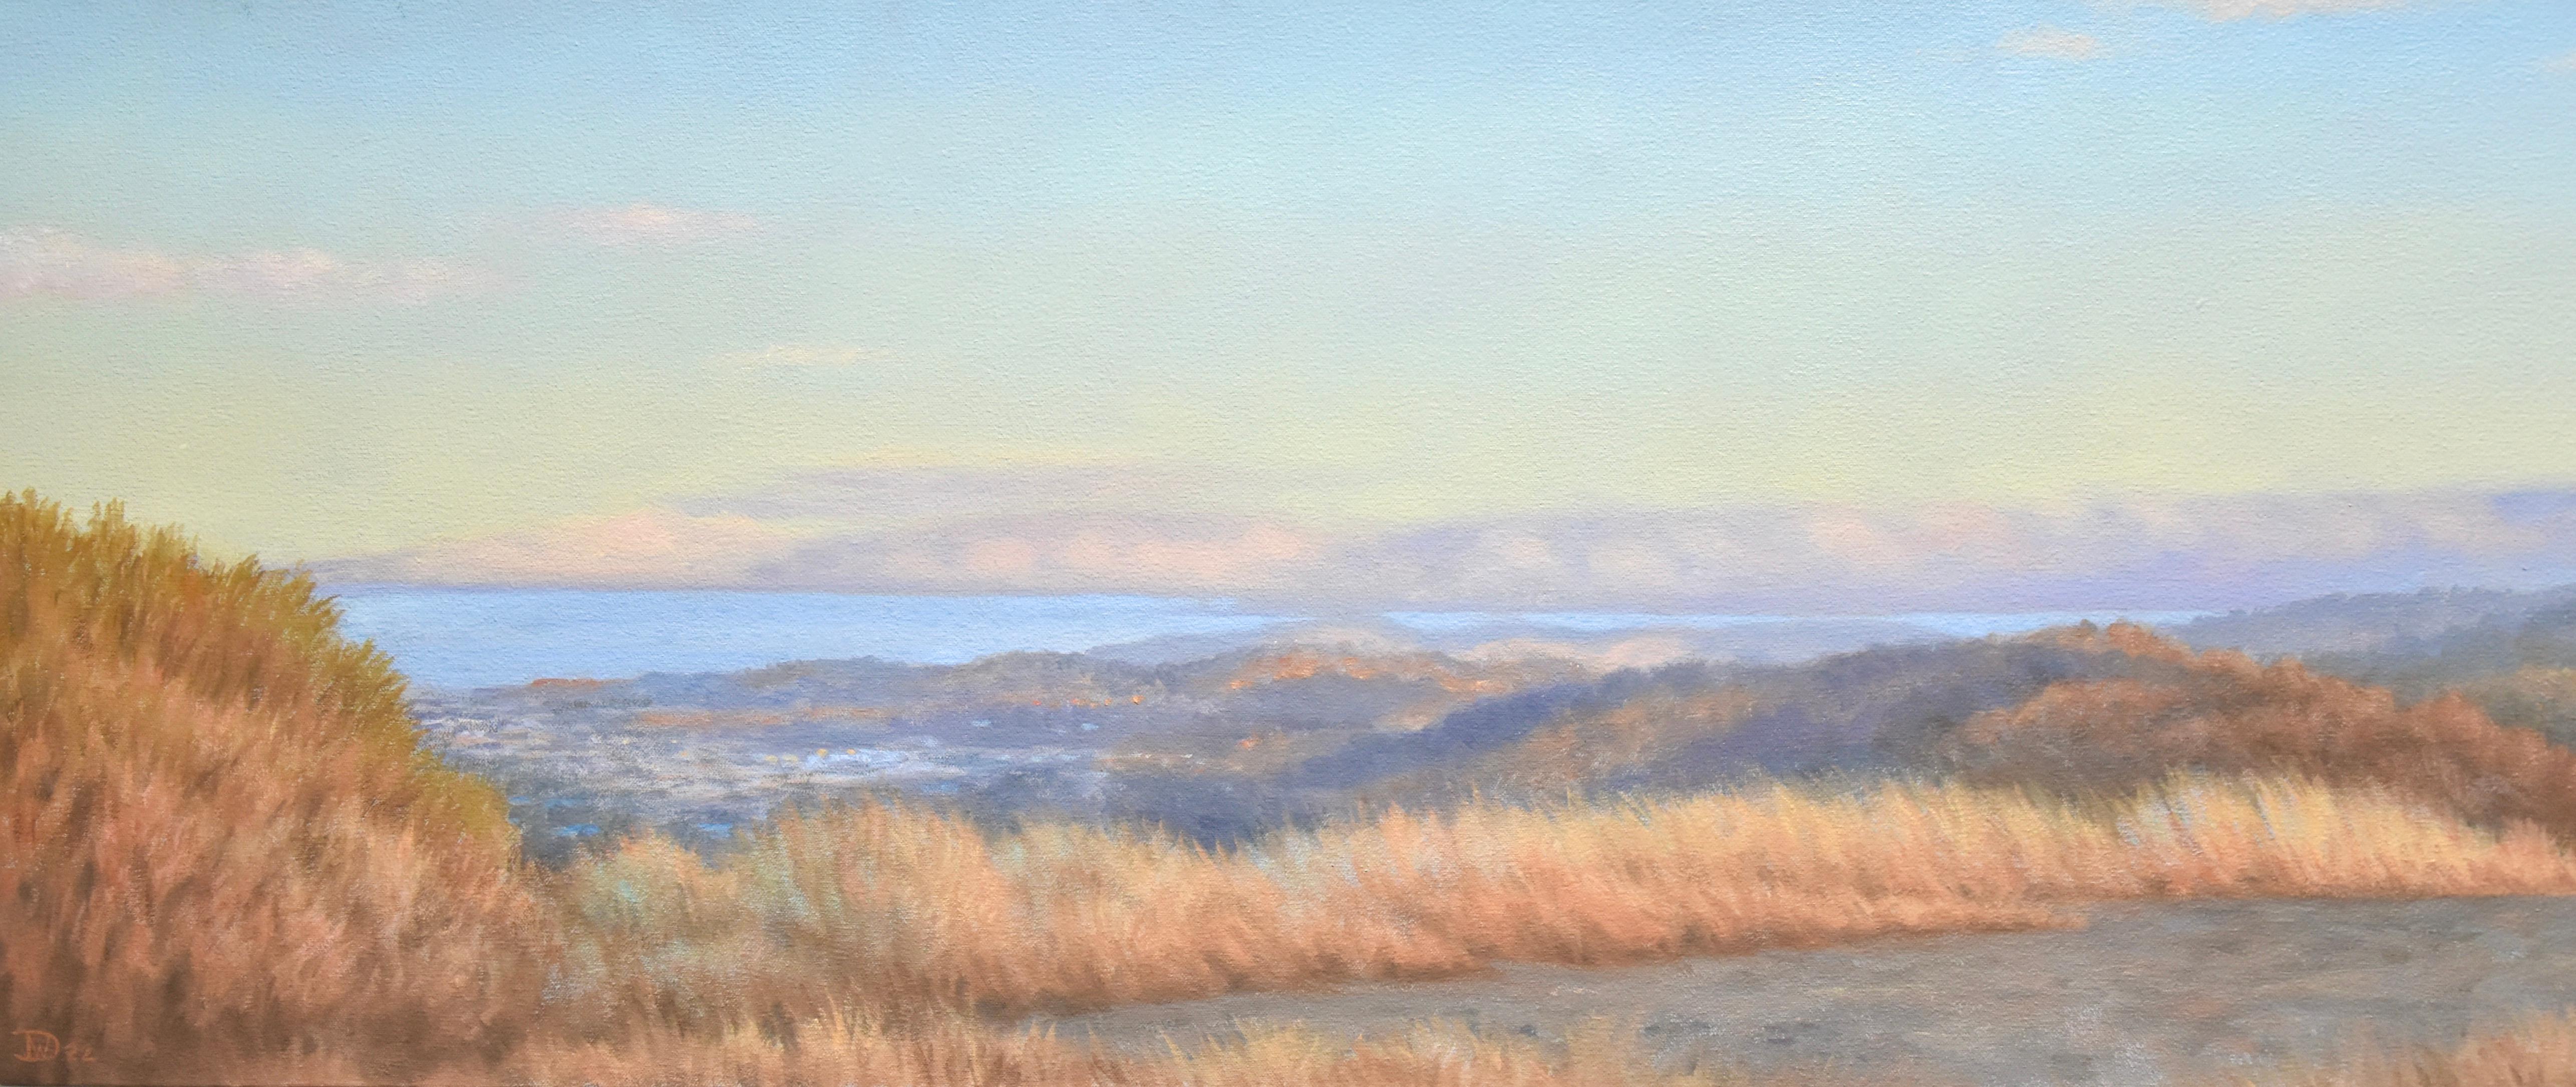 View From the Fire Road - Painting by Willard Dixon